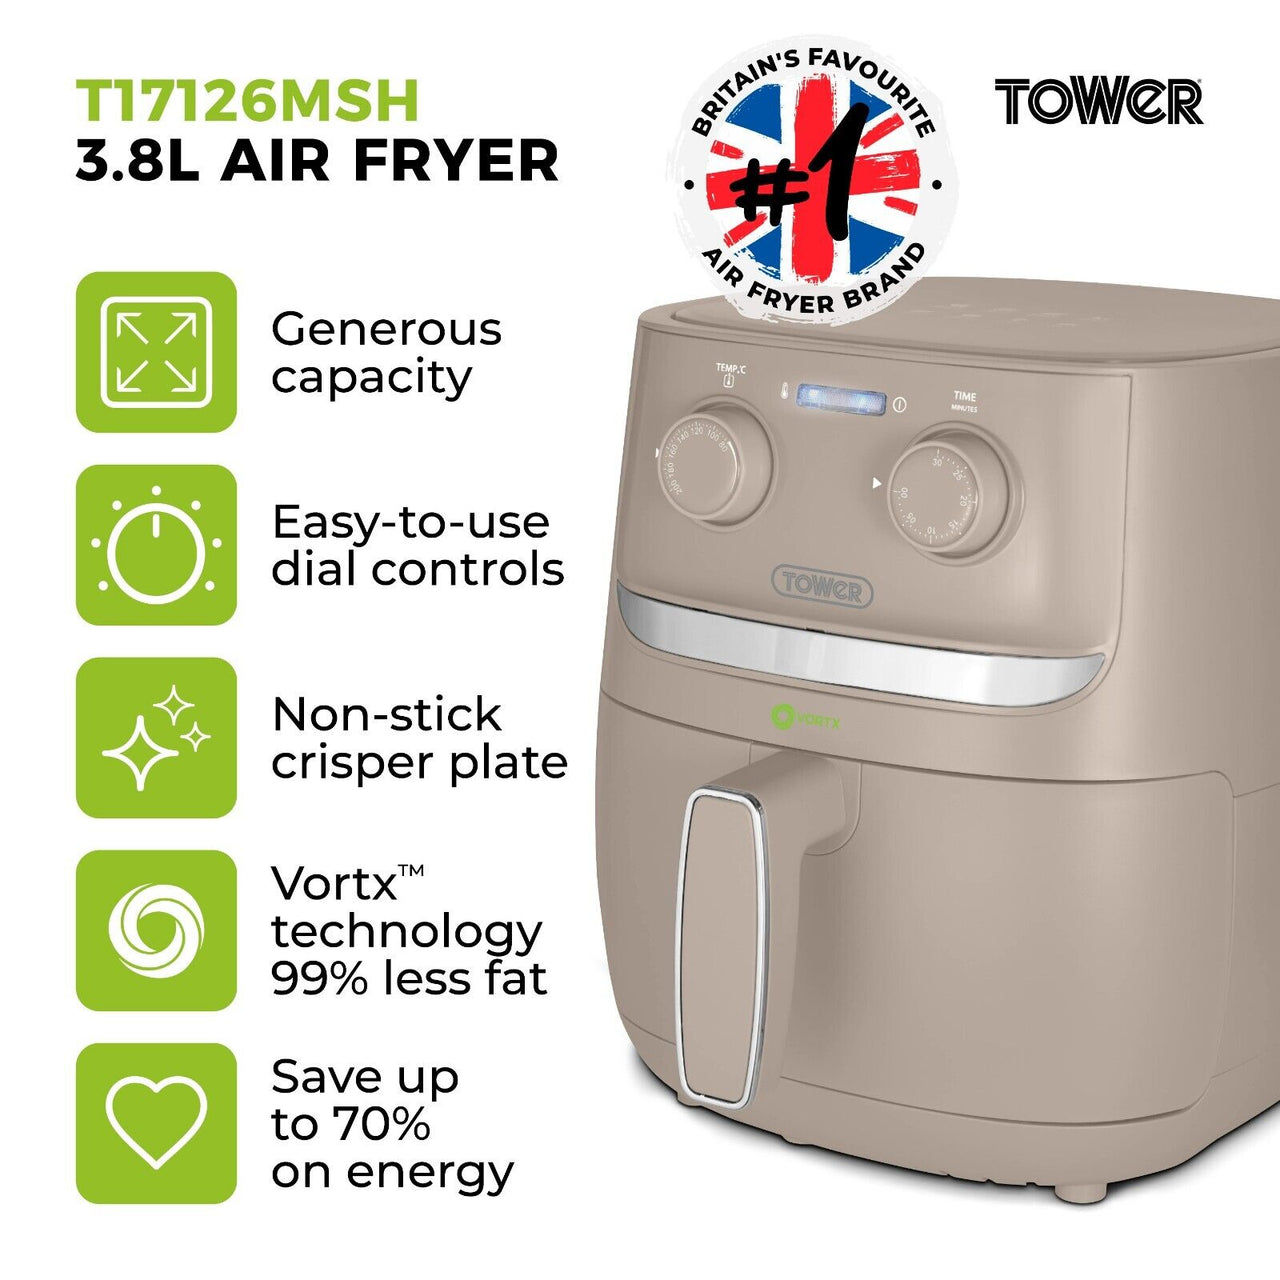 Tower Vortx 3.8 Litre Manual Air Fryer Latte T17126MSH New, 3 Year Guarantee